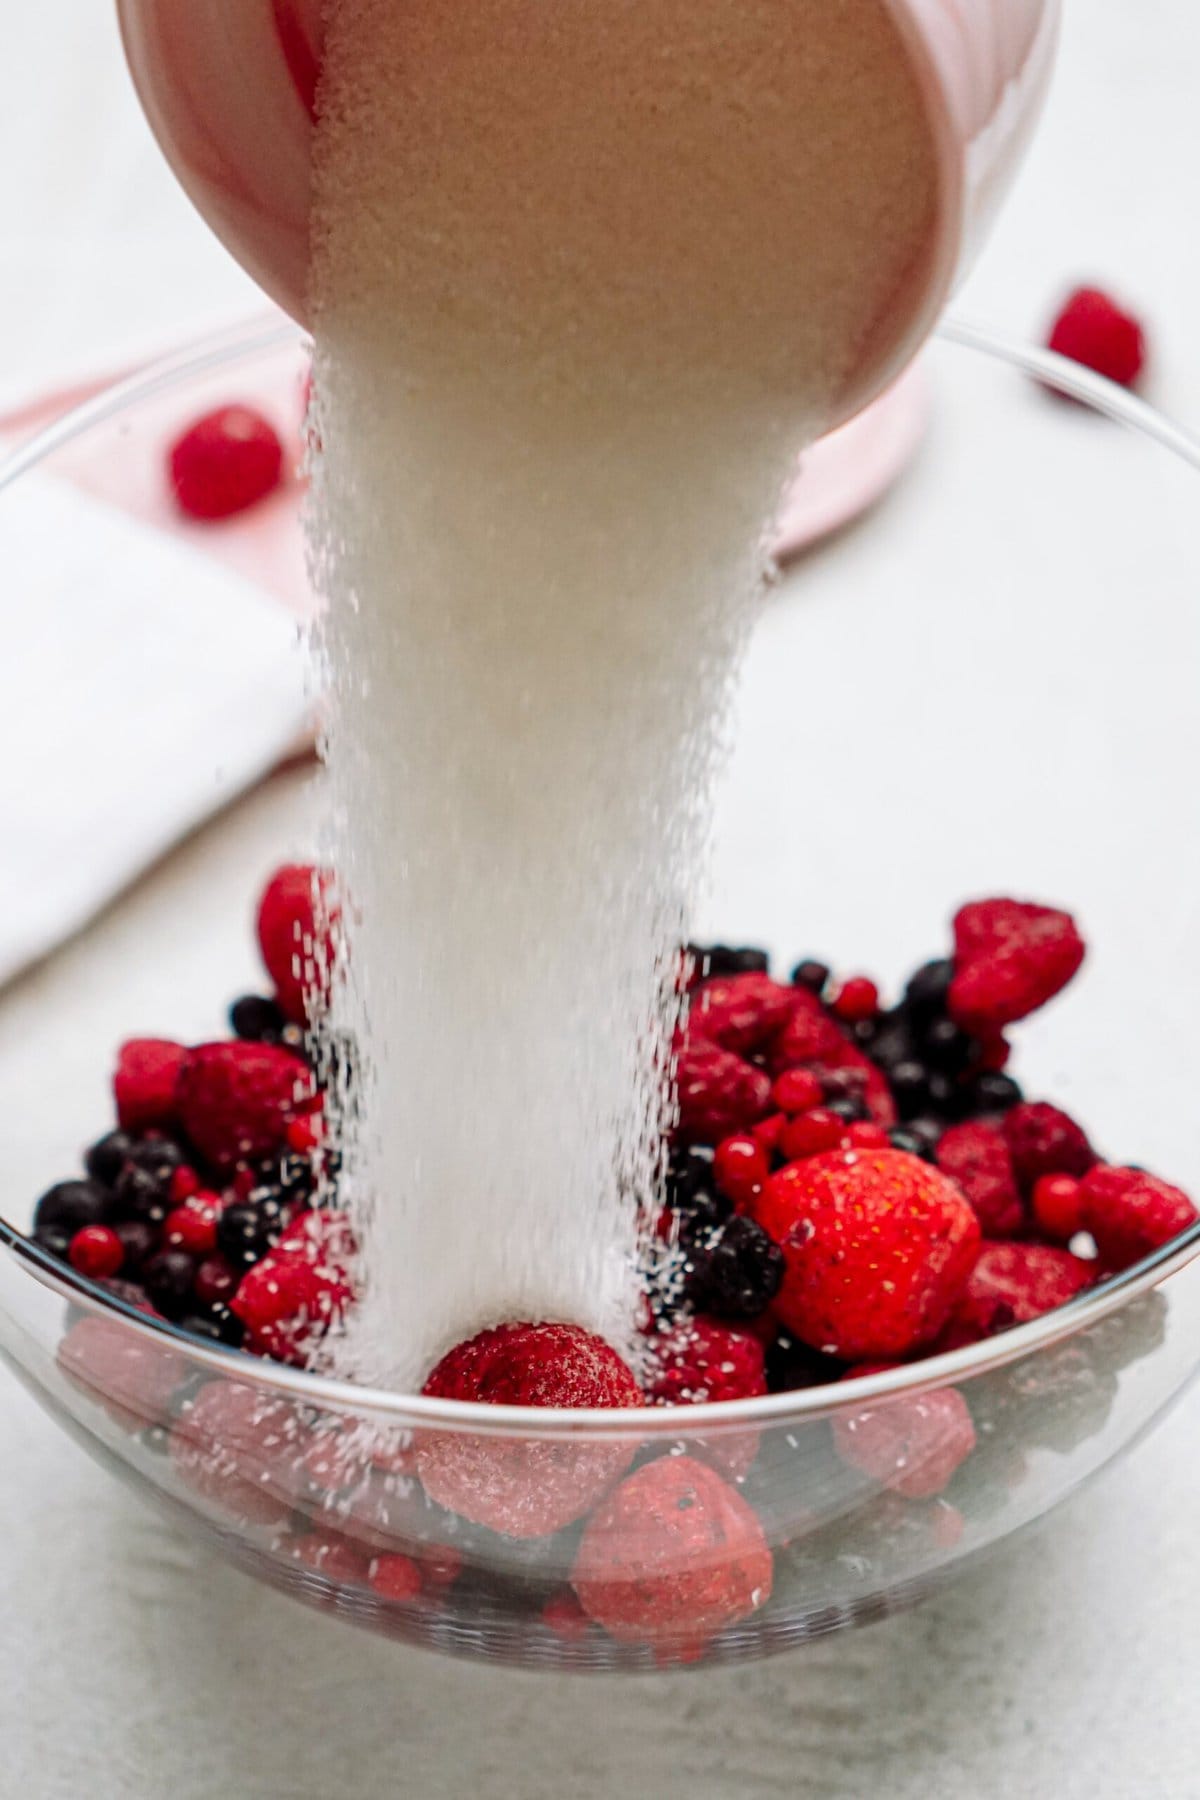 Sugar being poured from a bowl onto a mix of berries in a glass bowl.